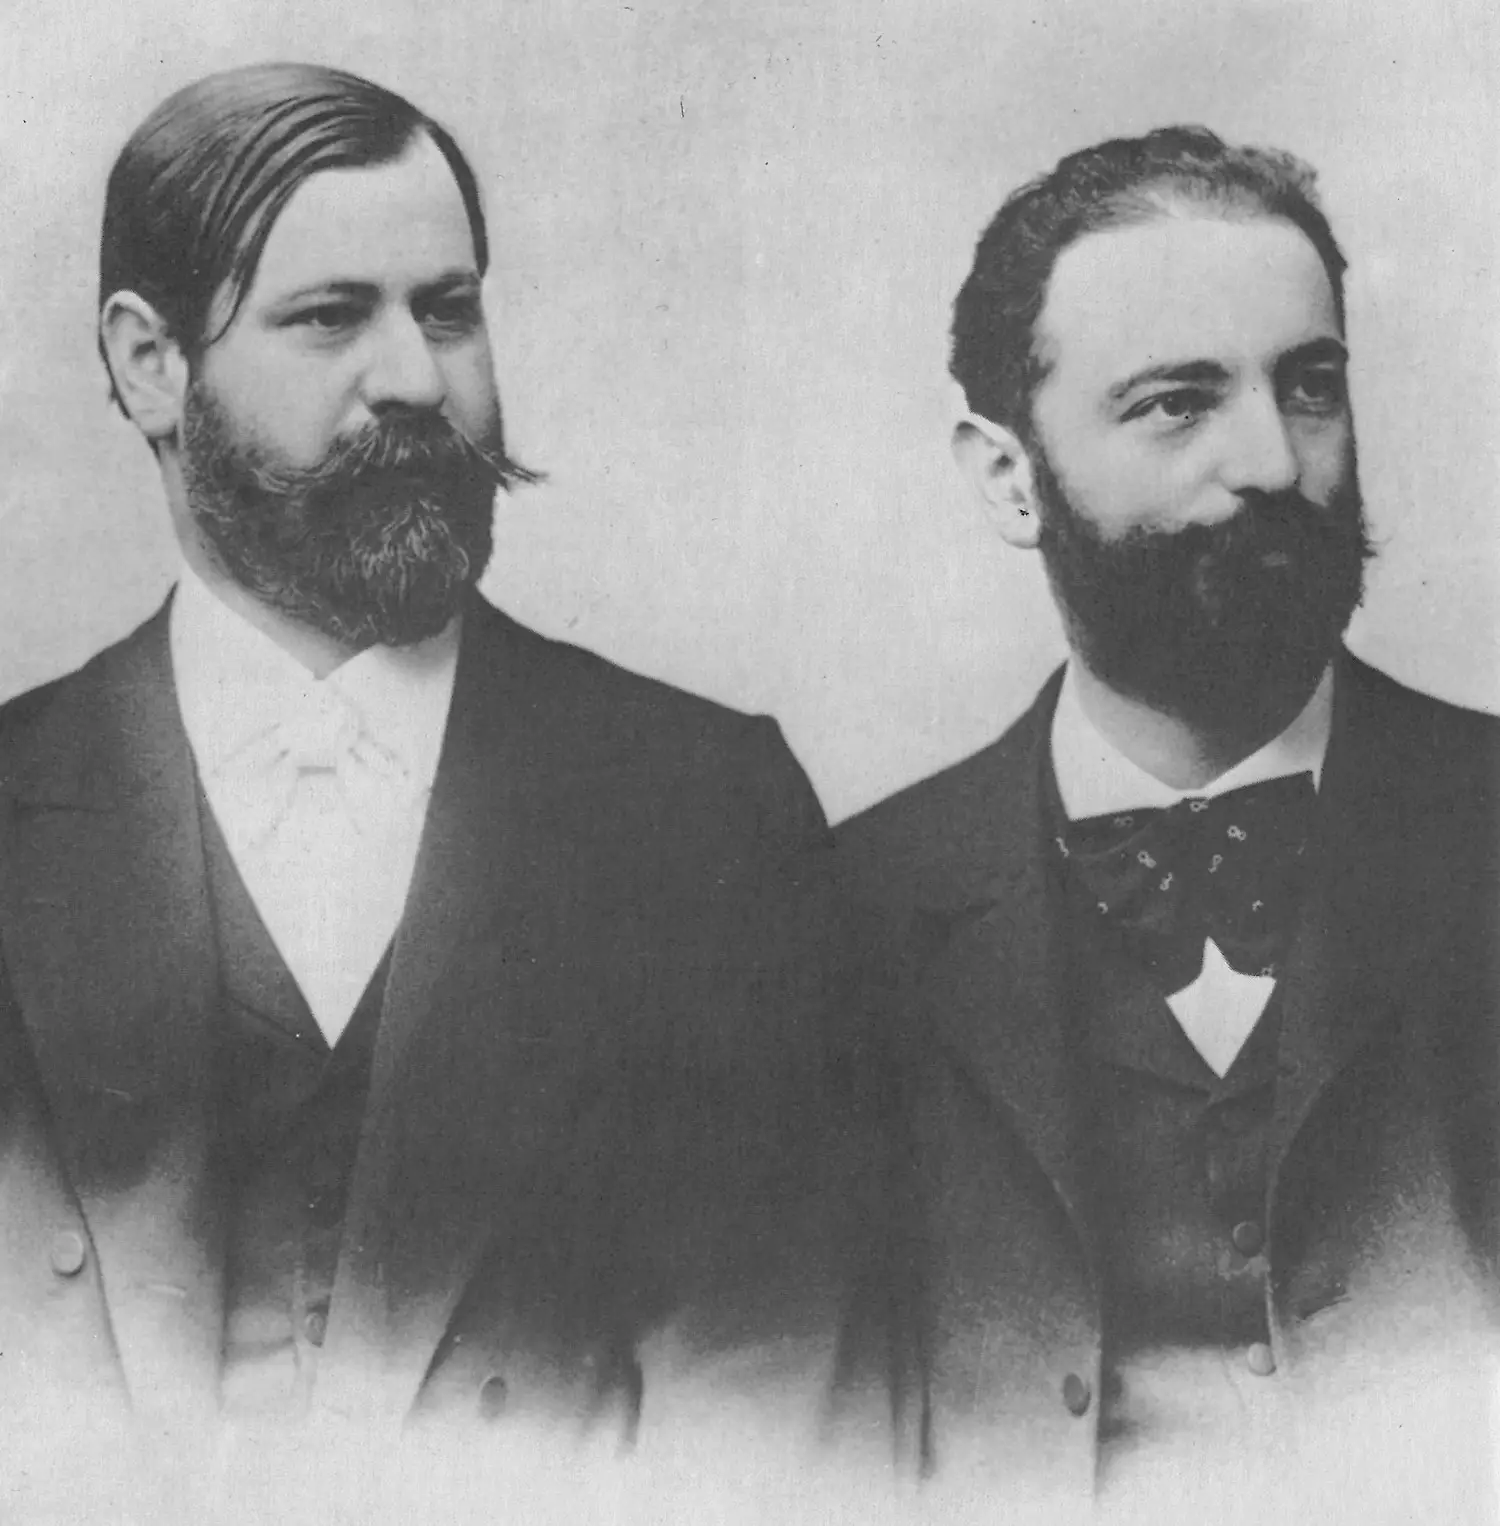 The middle-aged and bearded Sigmund Freud and Wilhelm Fliess photographed side-by-side.